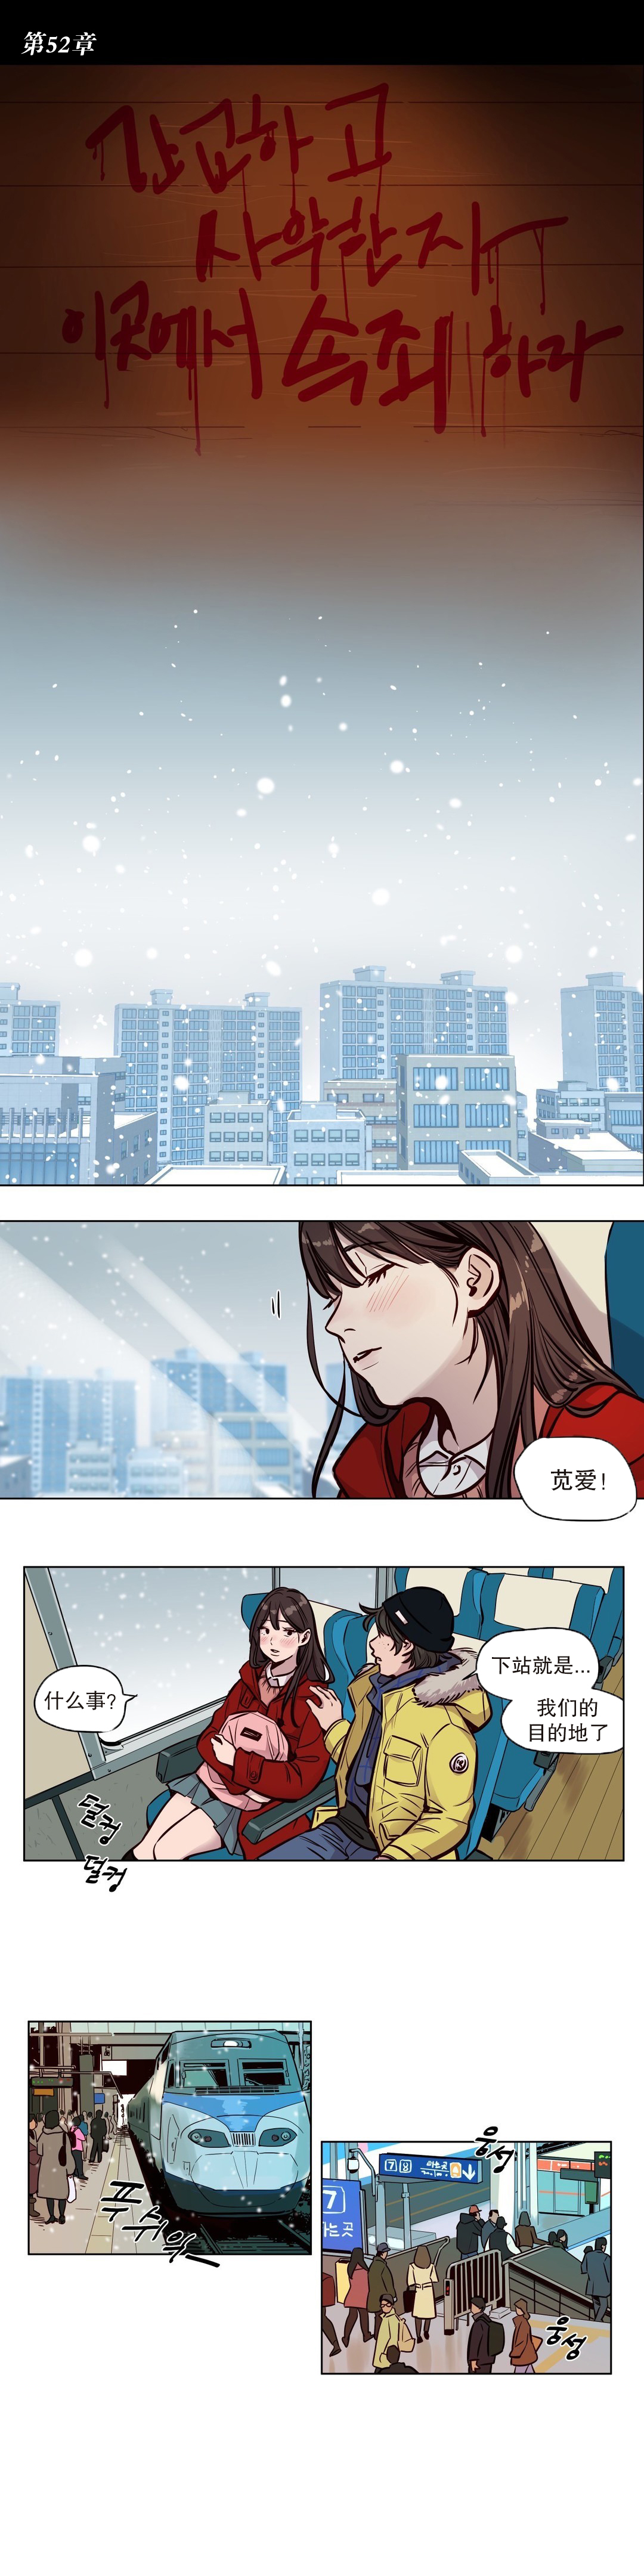 [Ramjak] 赎罪营(Atonement Camp) Ch.50-52 (Chinese) 